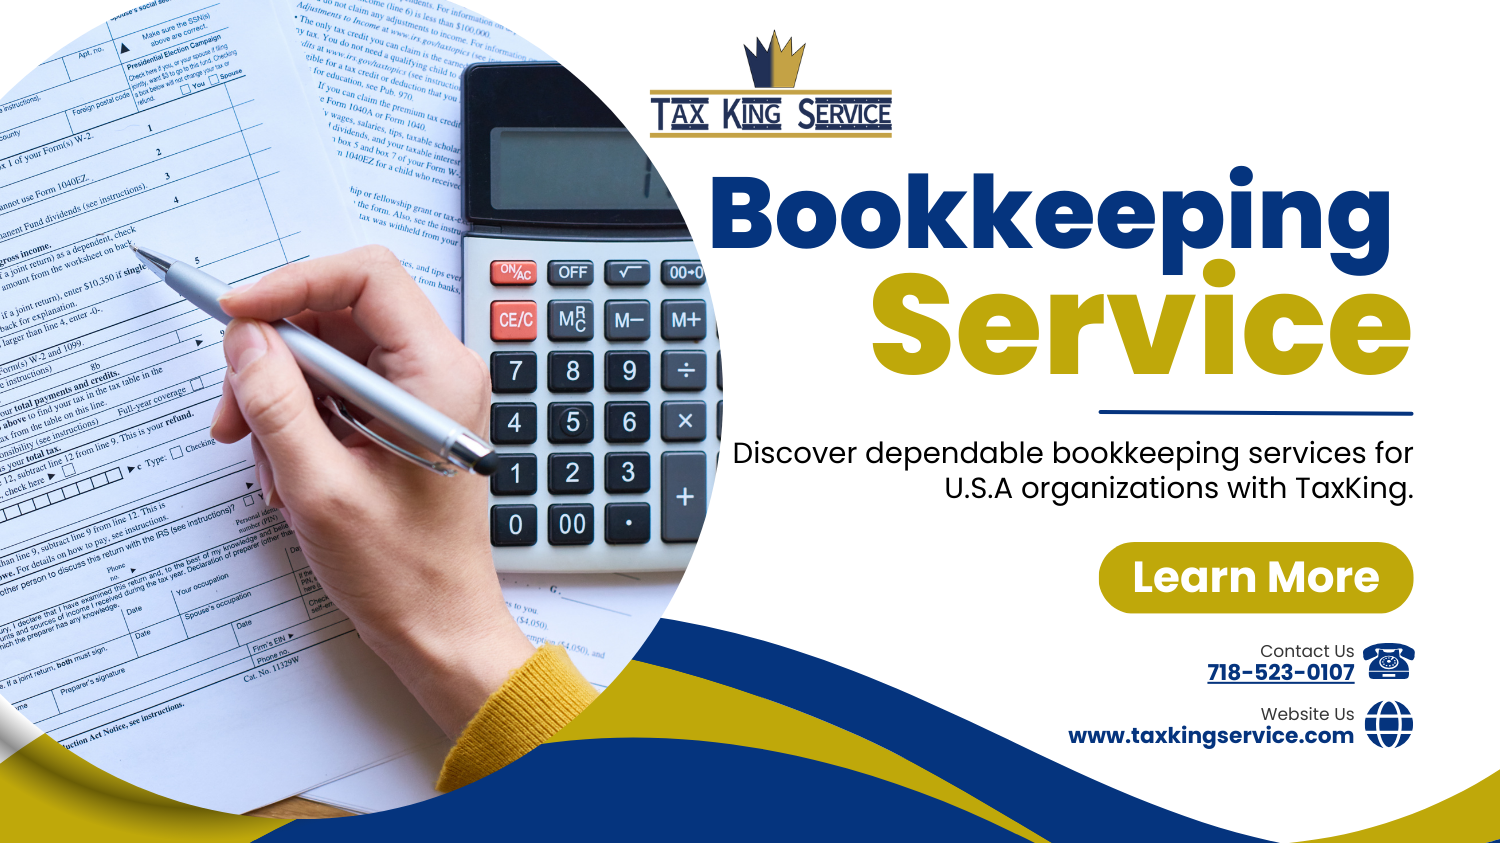 Bookkeeper's Toolbox